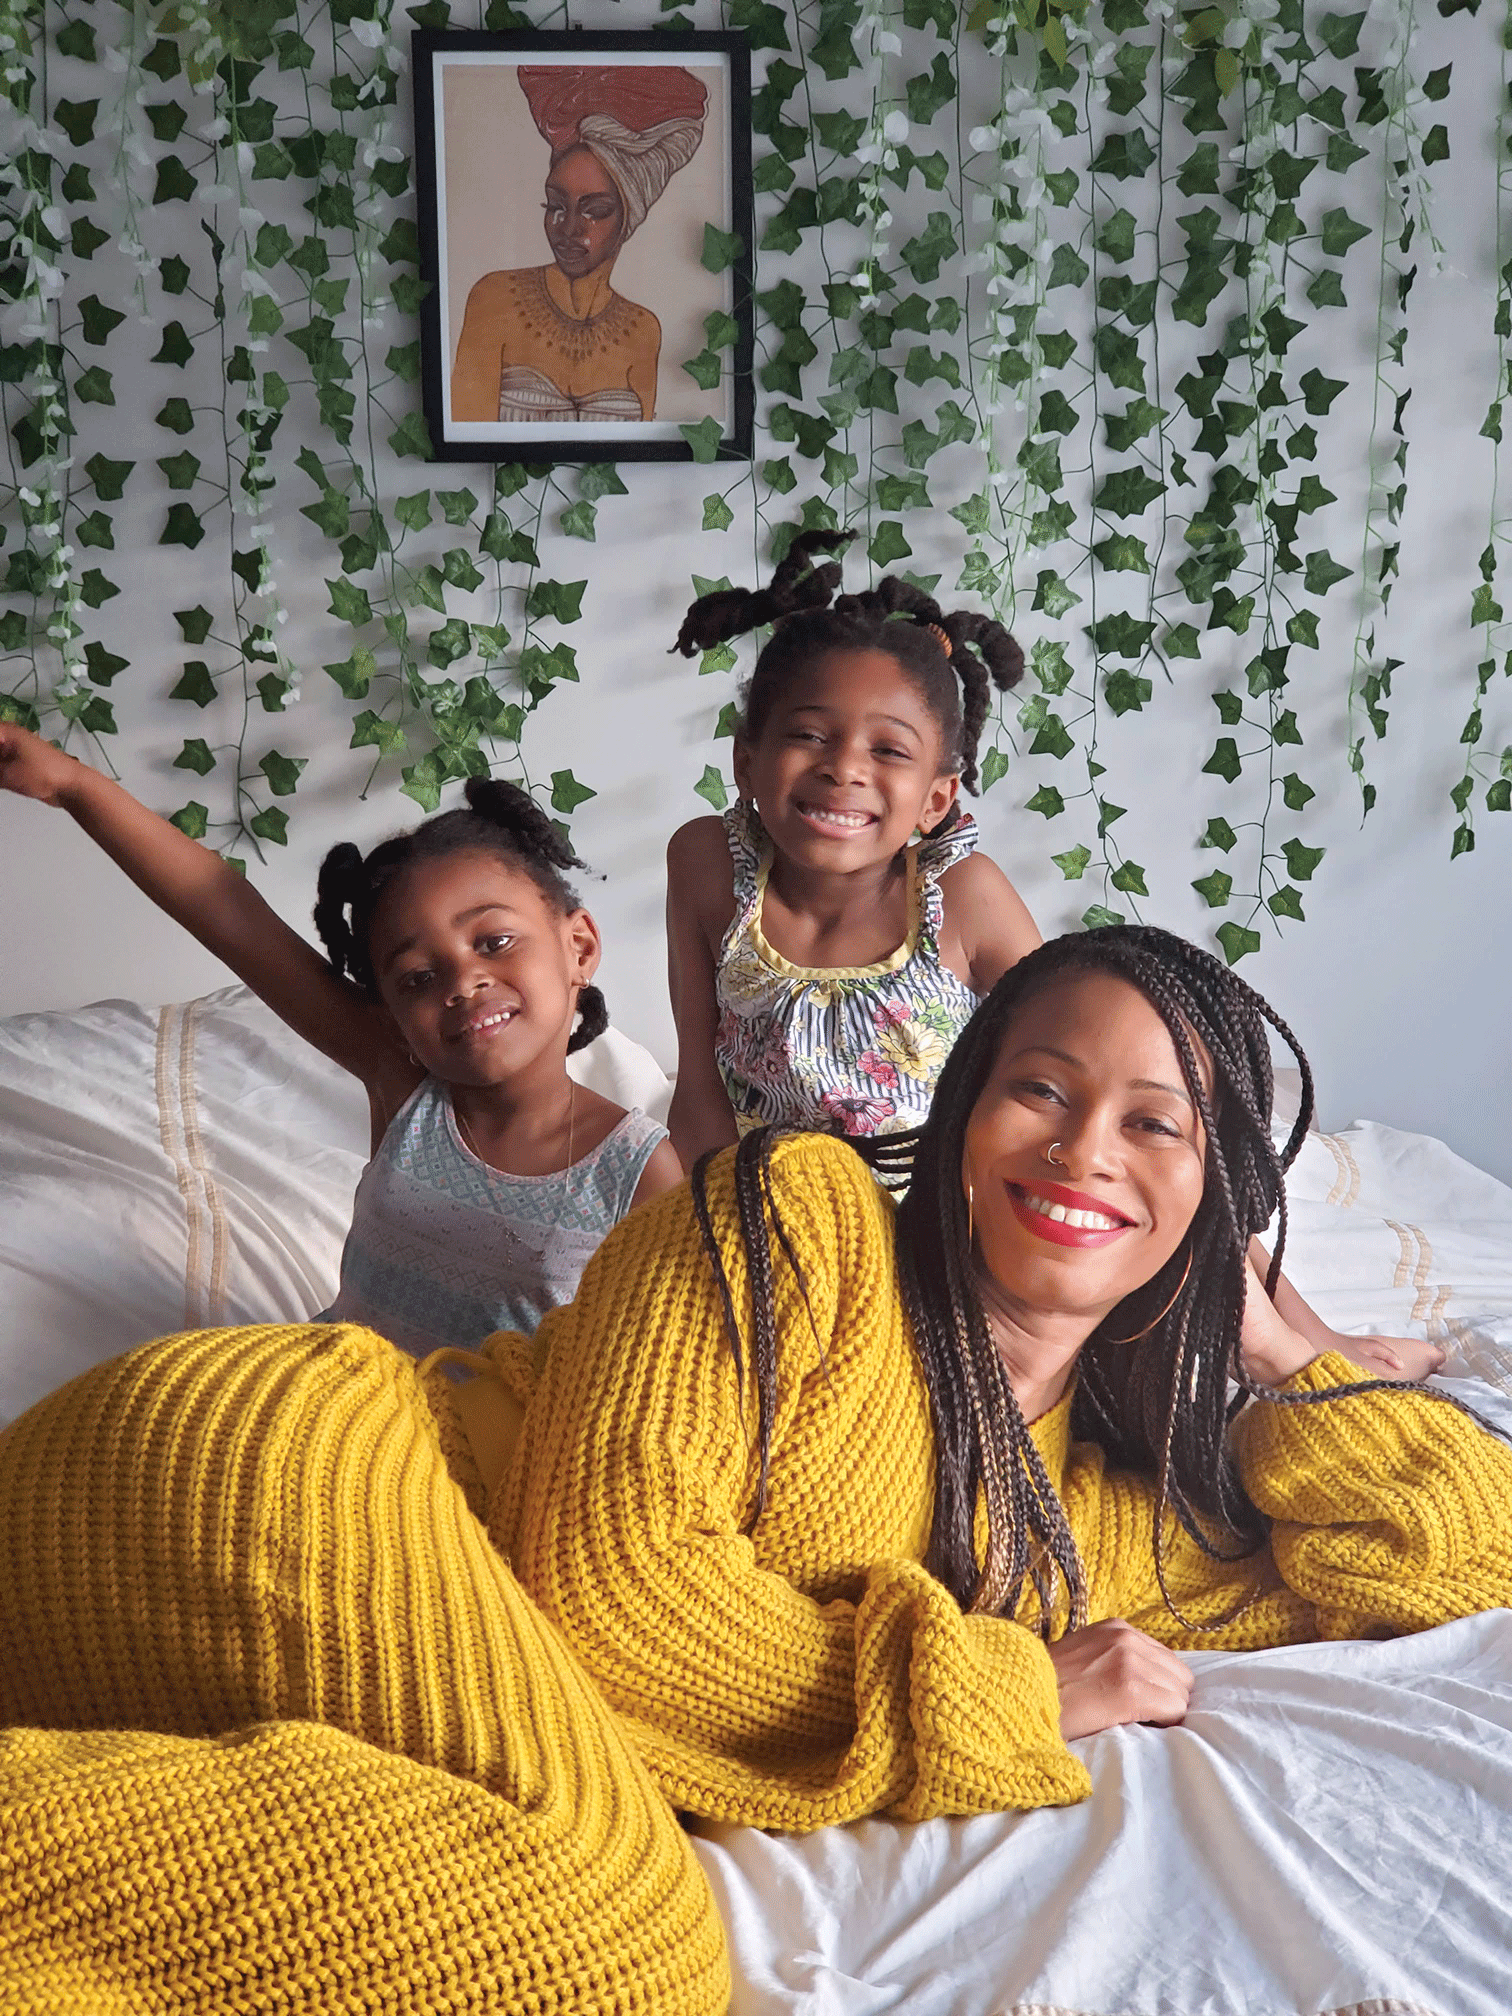 Mother and two young daughters smiling while laying on a bed with greenery in the background.